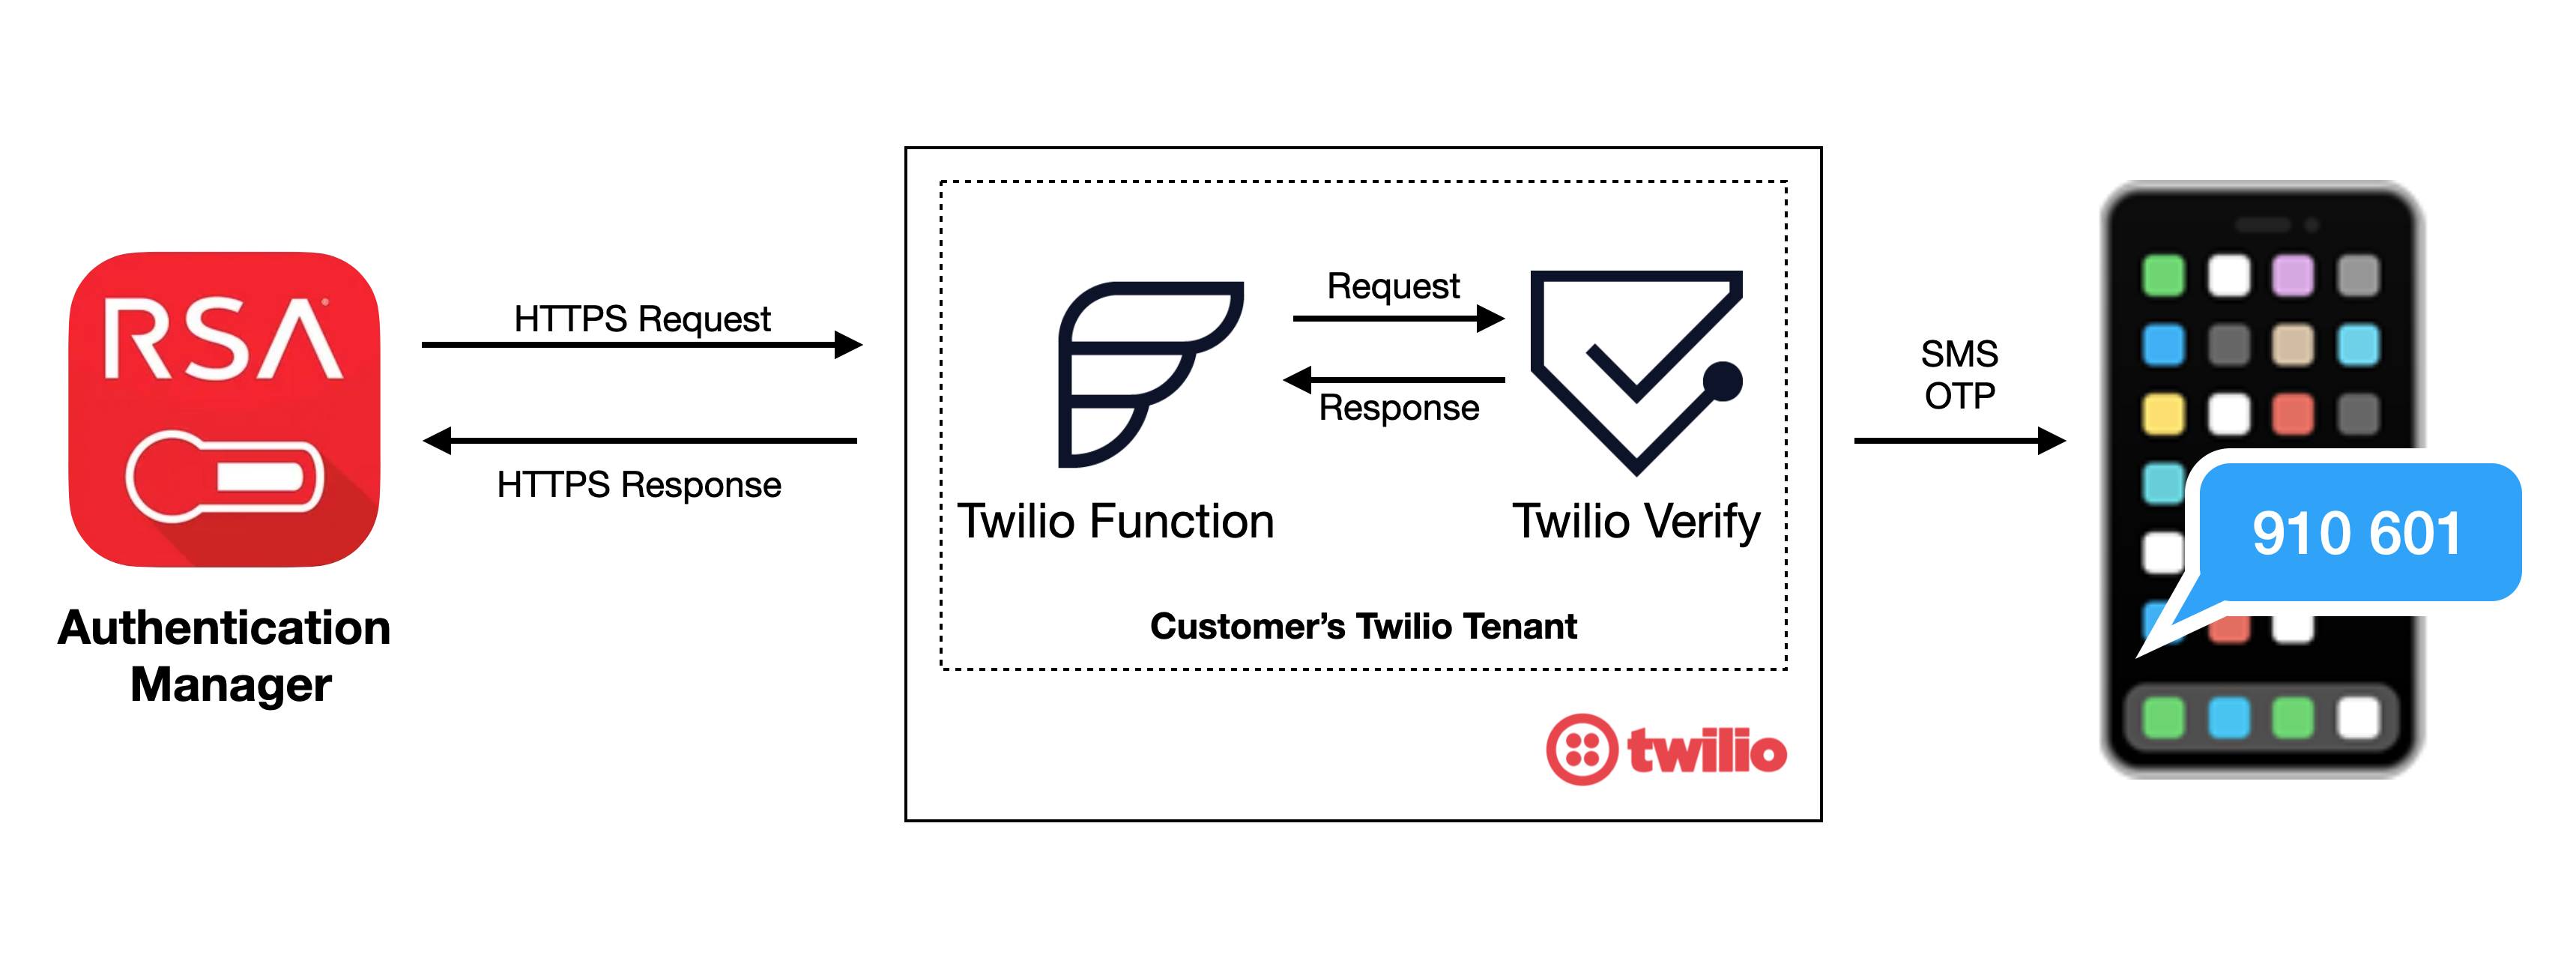 RSA authentication manager to Twilio Verify flow ending with an SMS OTP